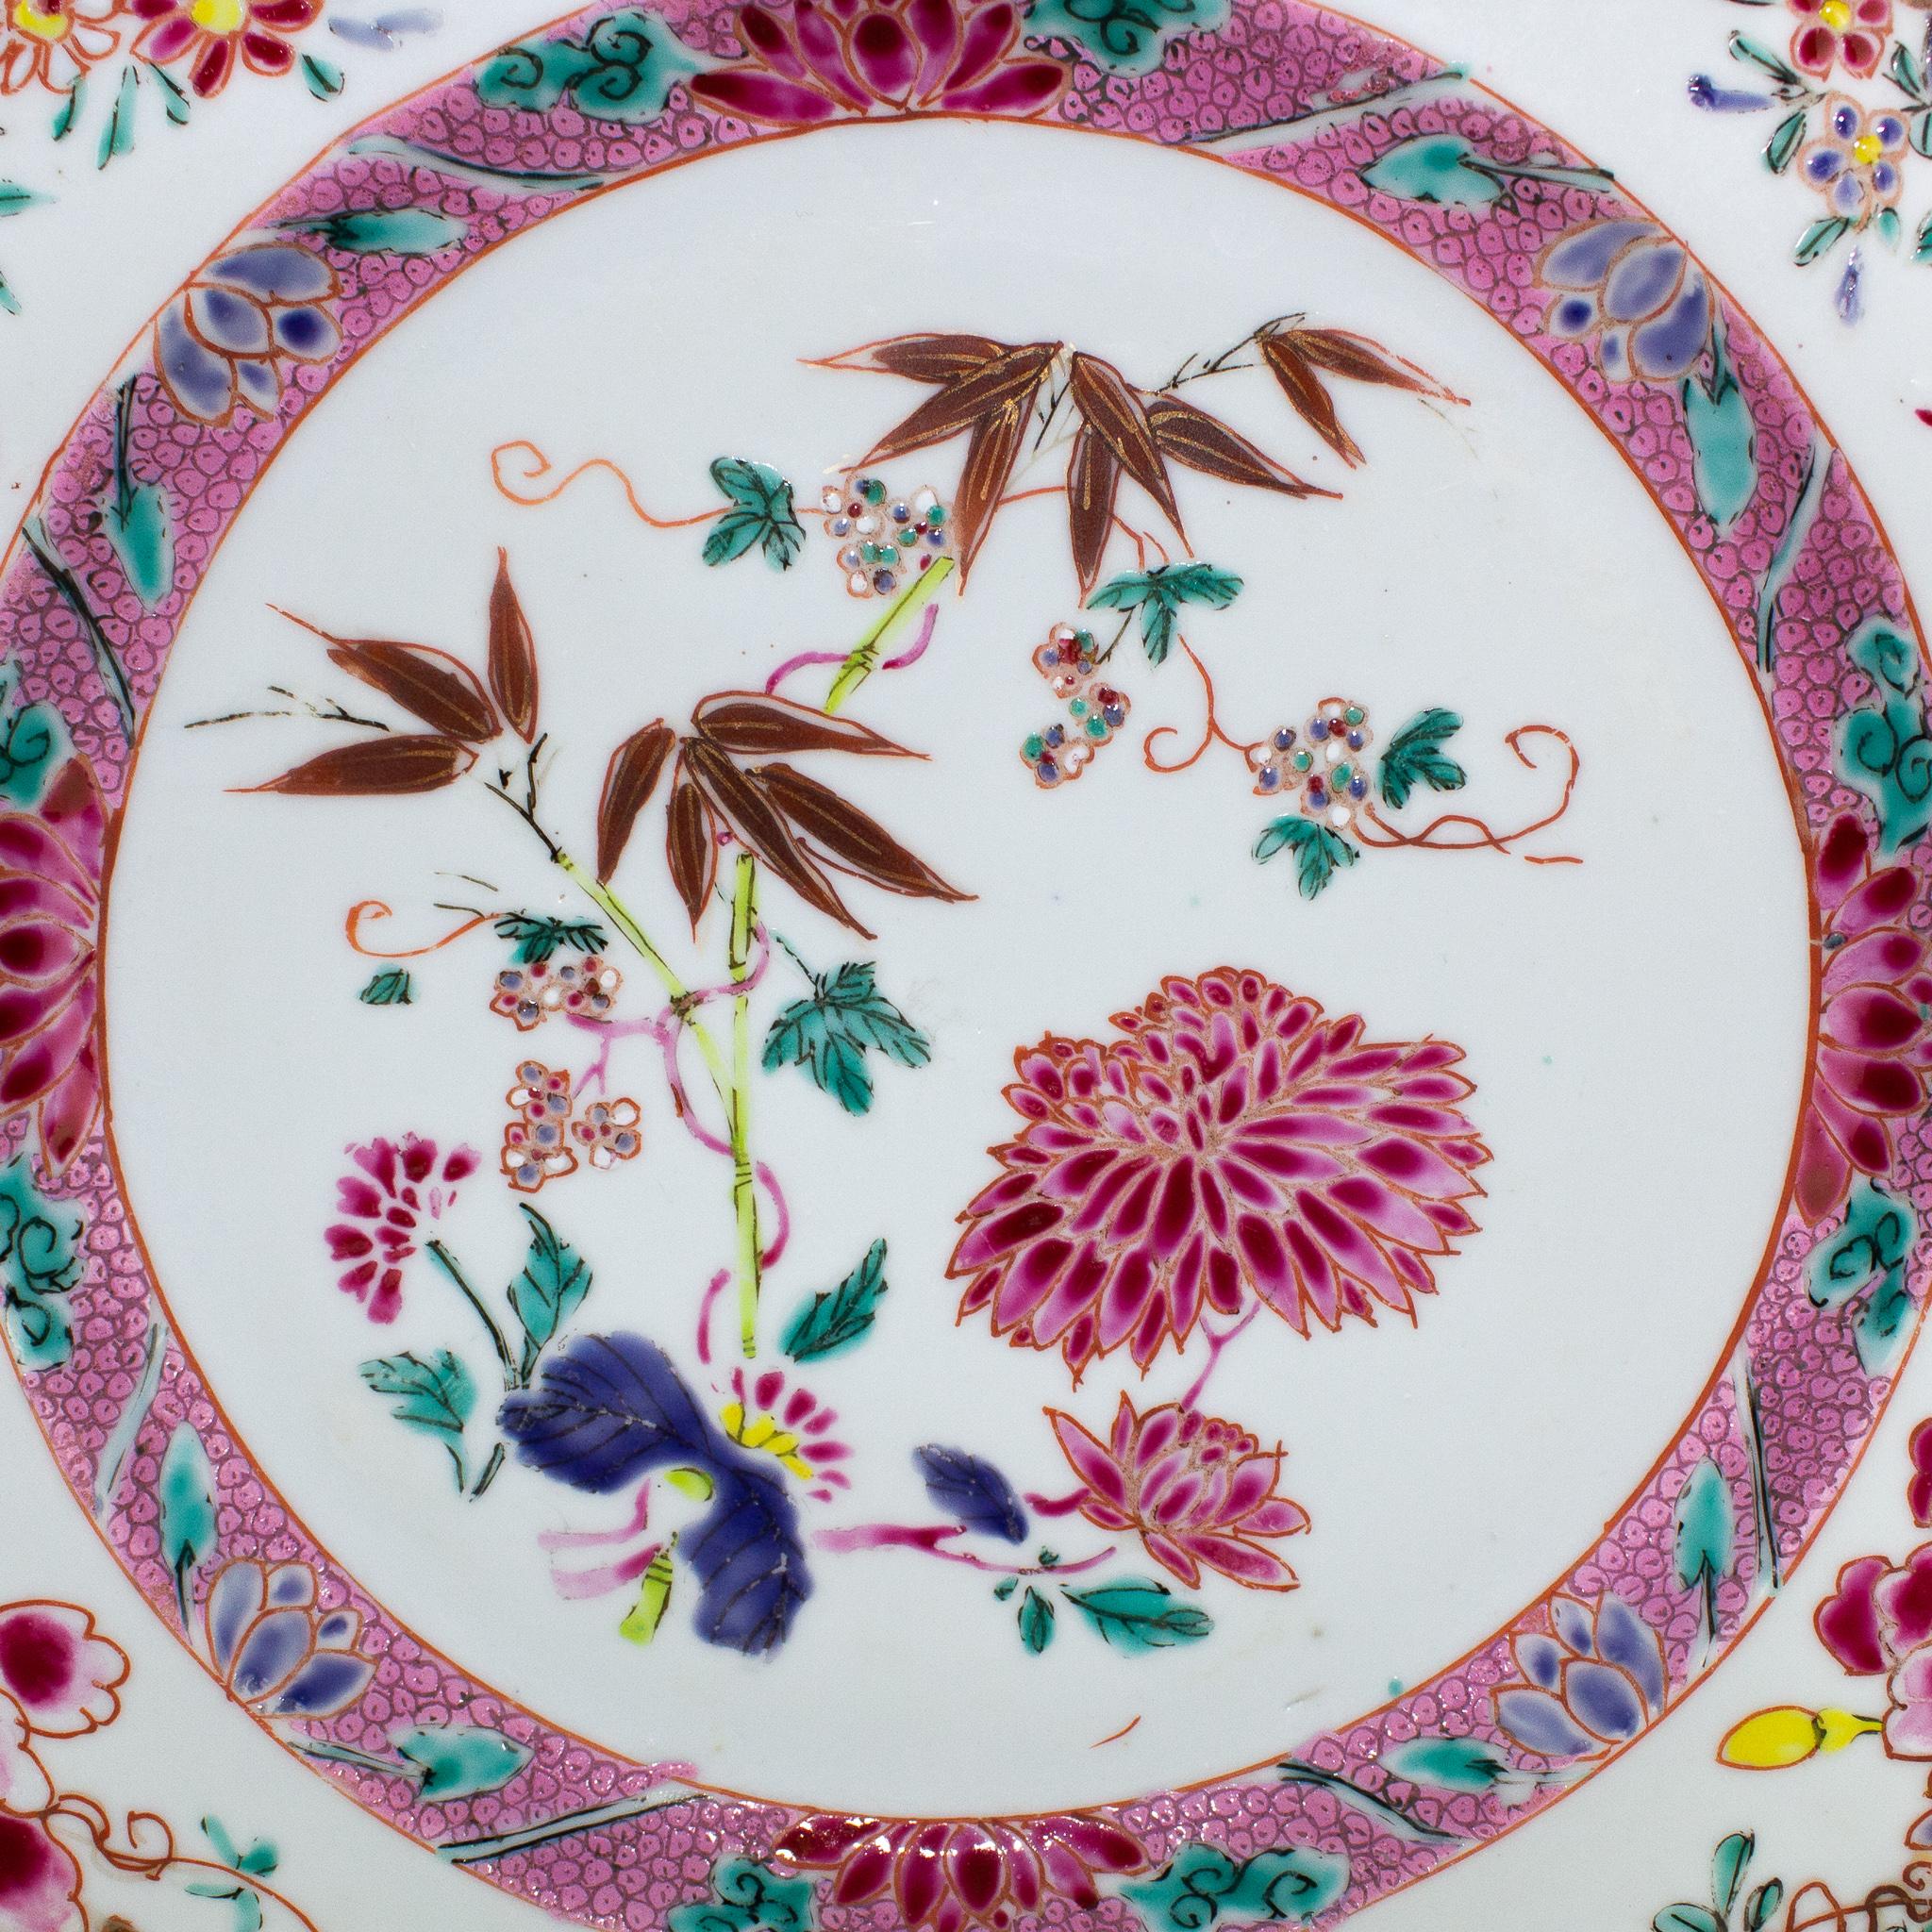 Pair of Chinese porcelain rounded dishes, East India Company, Yongzheng period (1723-1735). Polychrome decoration depicting in the centre bamboos, emblem of longevity, and floral motifs. The centre it’s framed by a frieze of overlapping scale